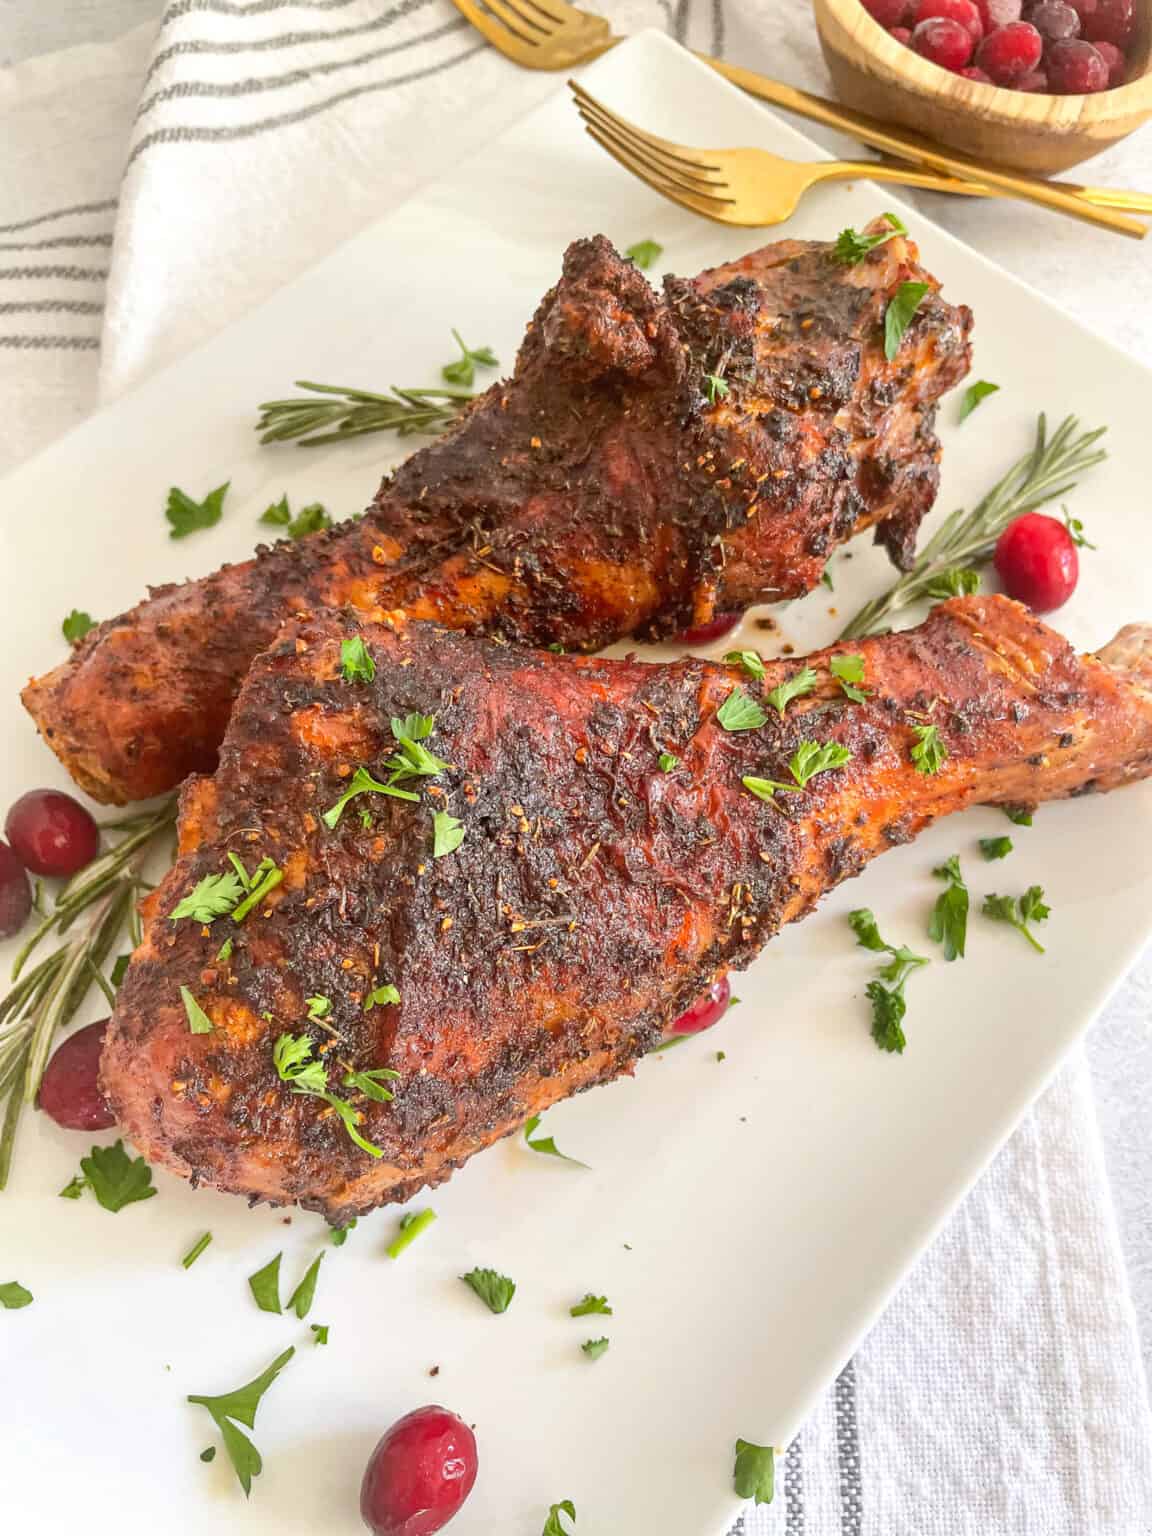 Two Air Fryer Turkey Legs on a plate garnish with parsley, rosemary and cranberries